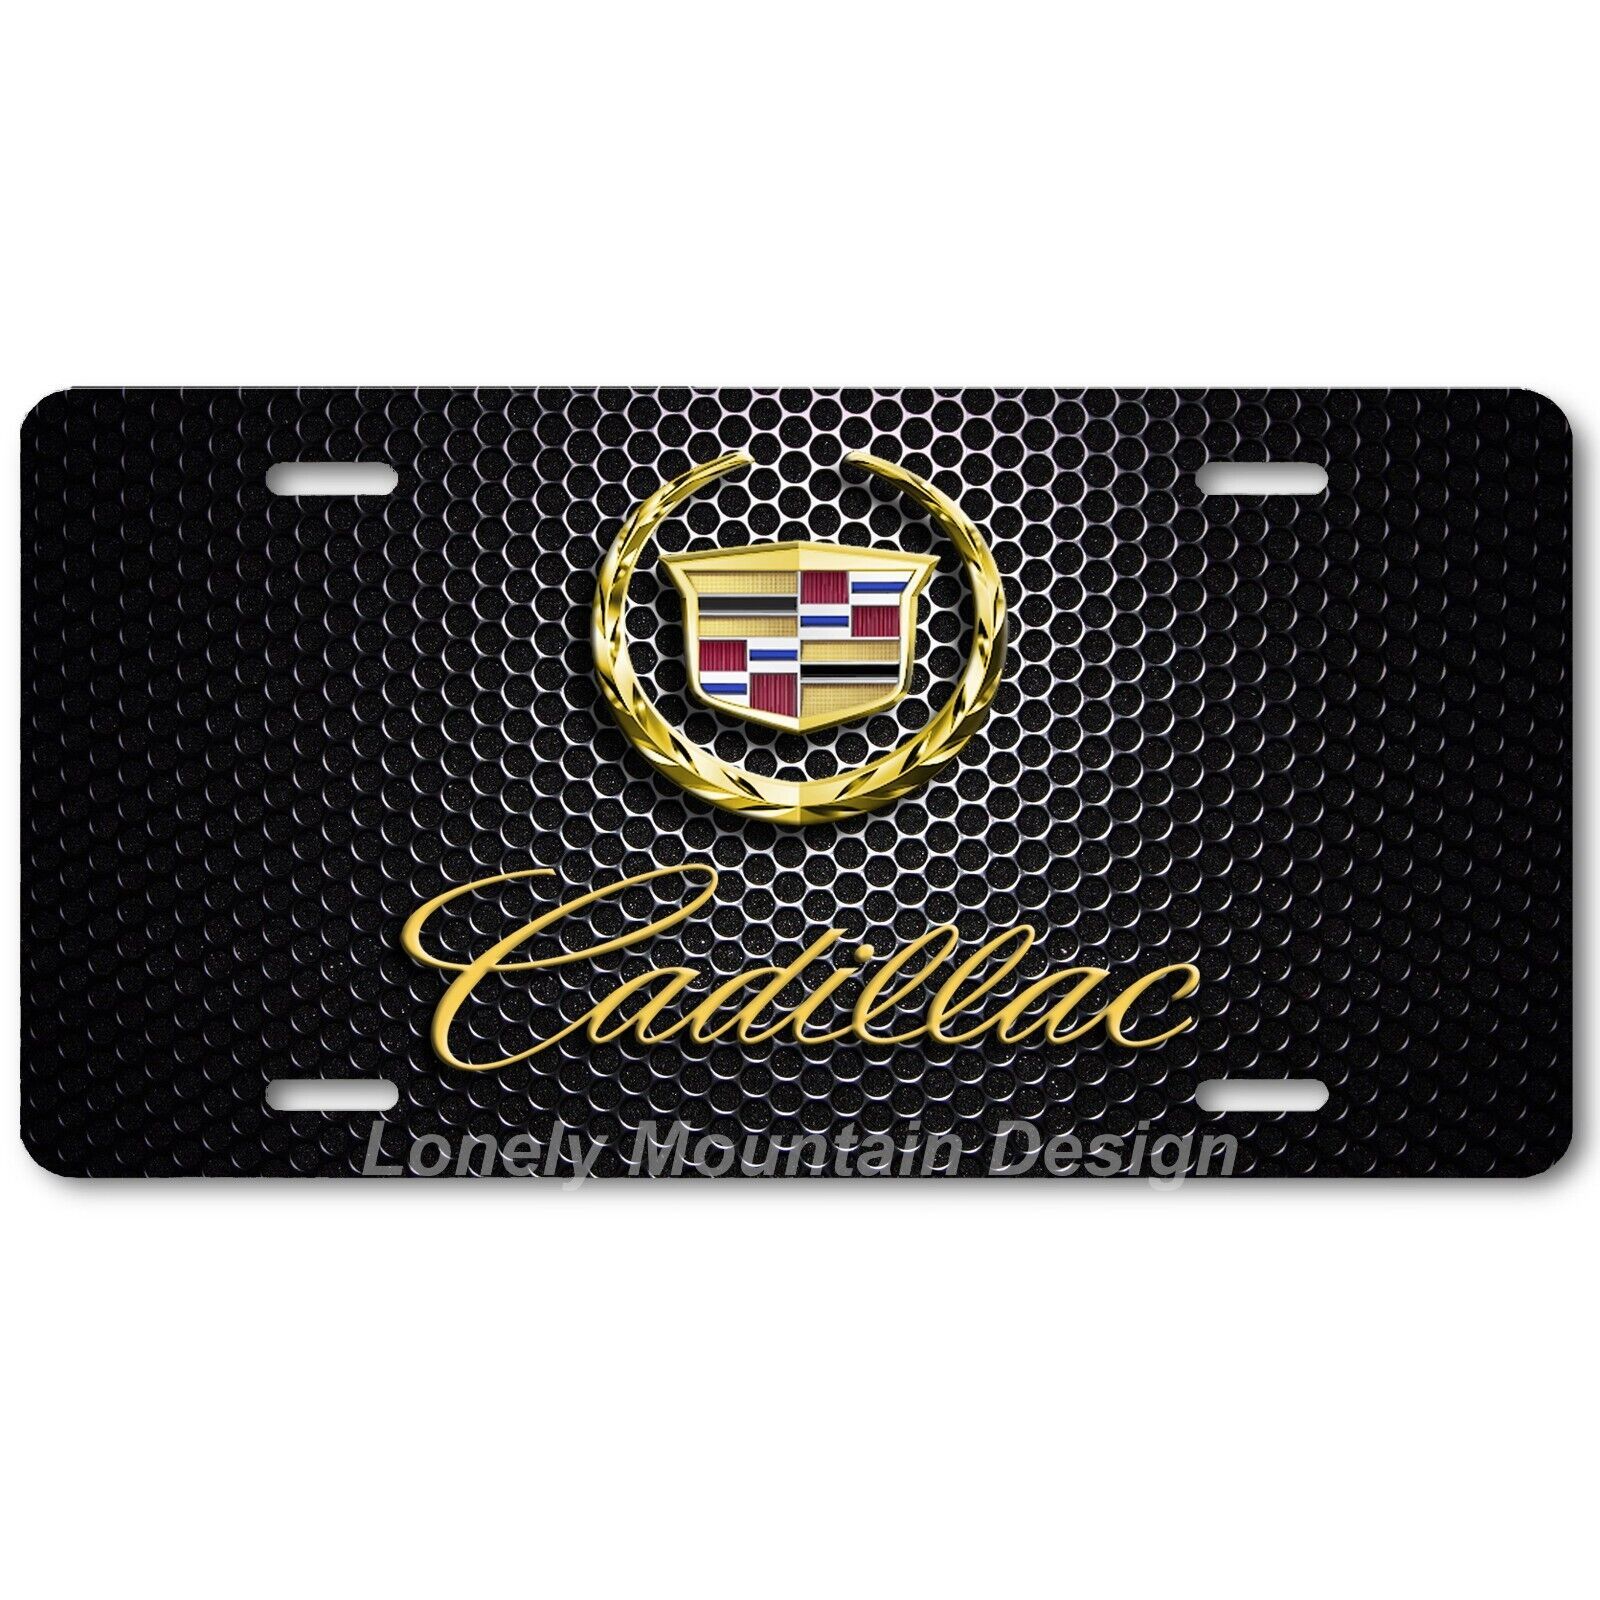 Primary image for Cadillac Inspired Art Gold on Mesh FLAT Aluminum Novelty Auto License Tag Plate